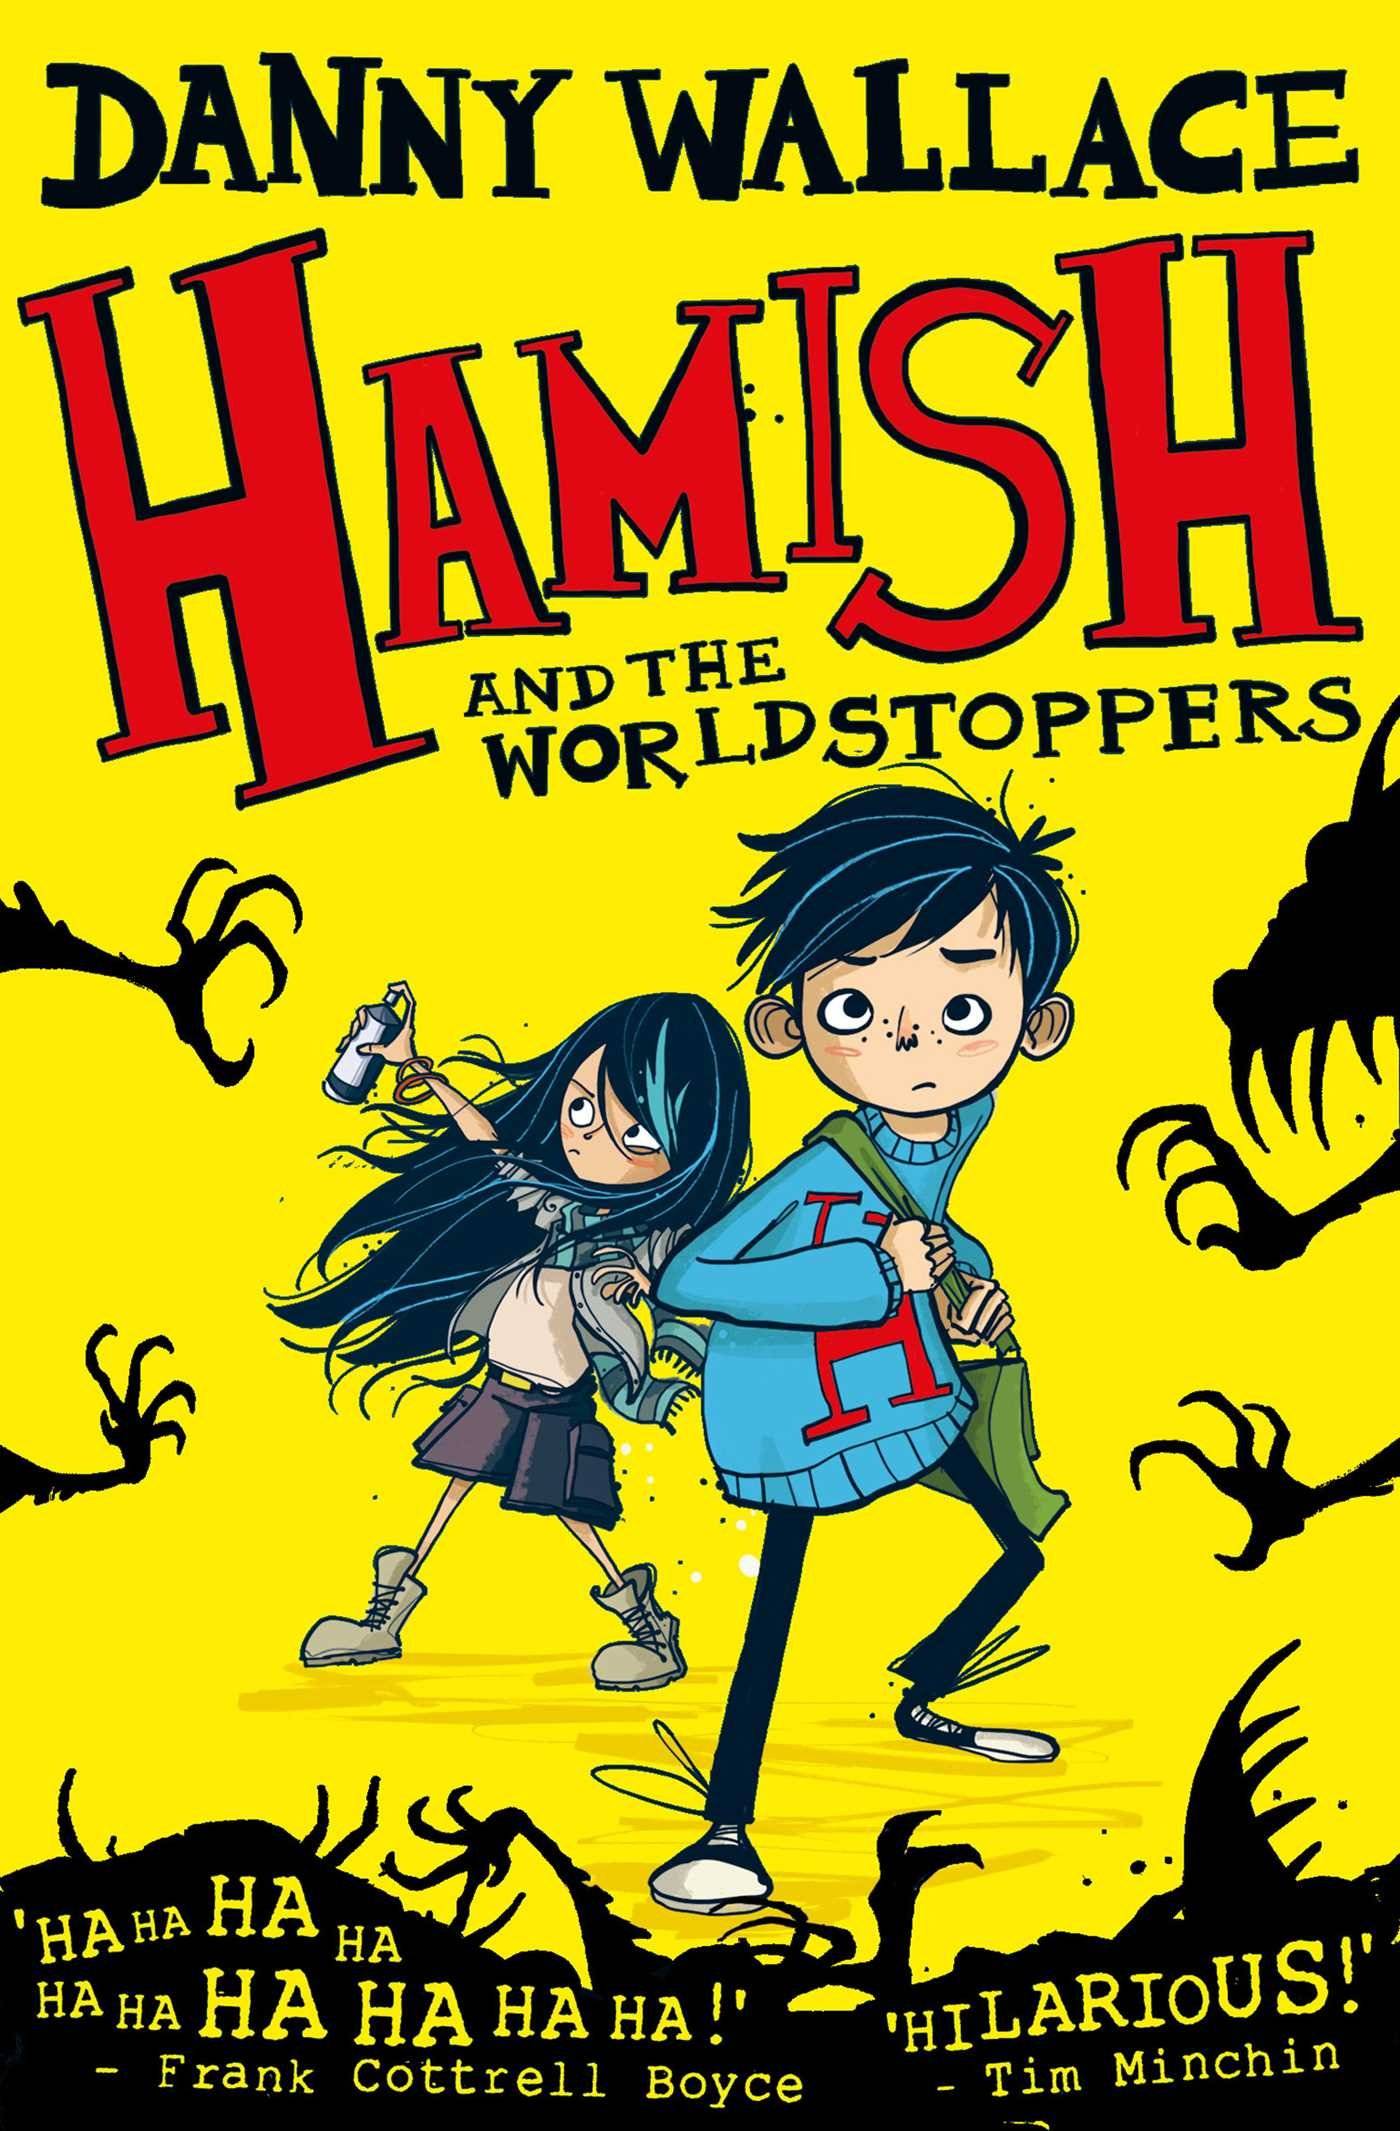 IMG : Hamish and the worldstoppers